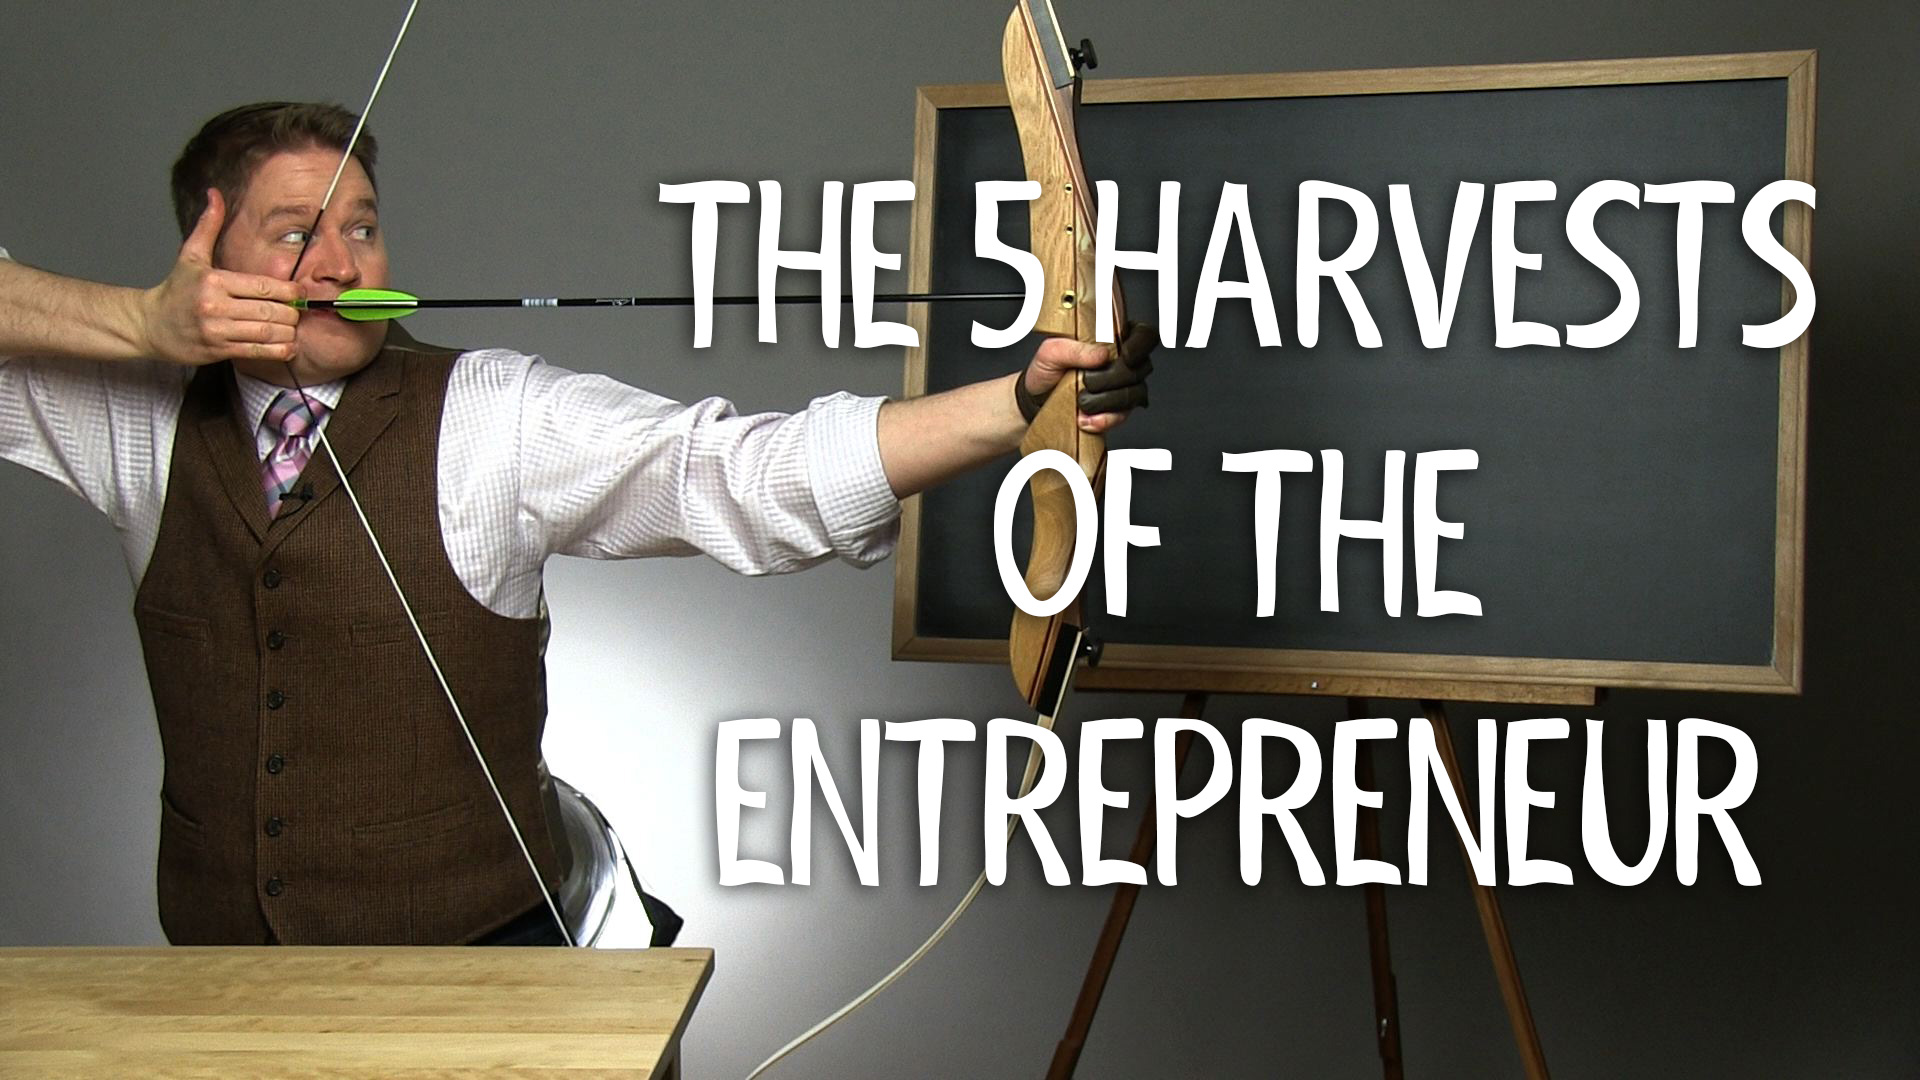 The 5 Harvests of The Entrepreneur – A New Kind of Exit Strategy